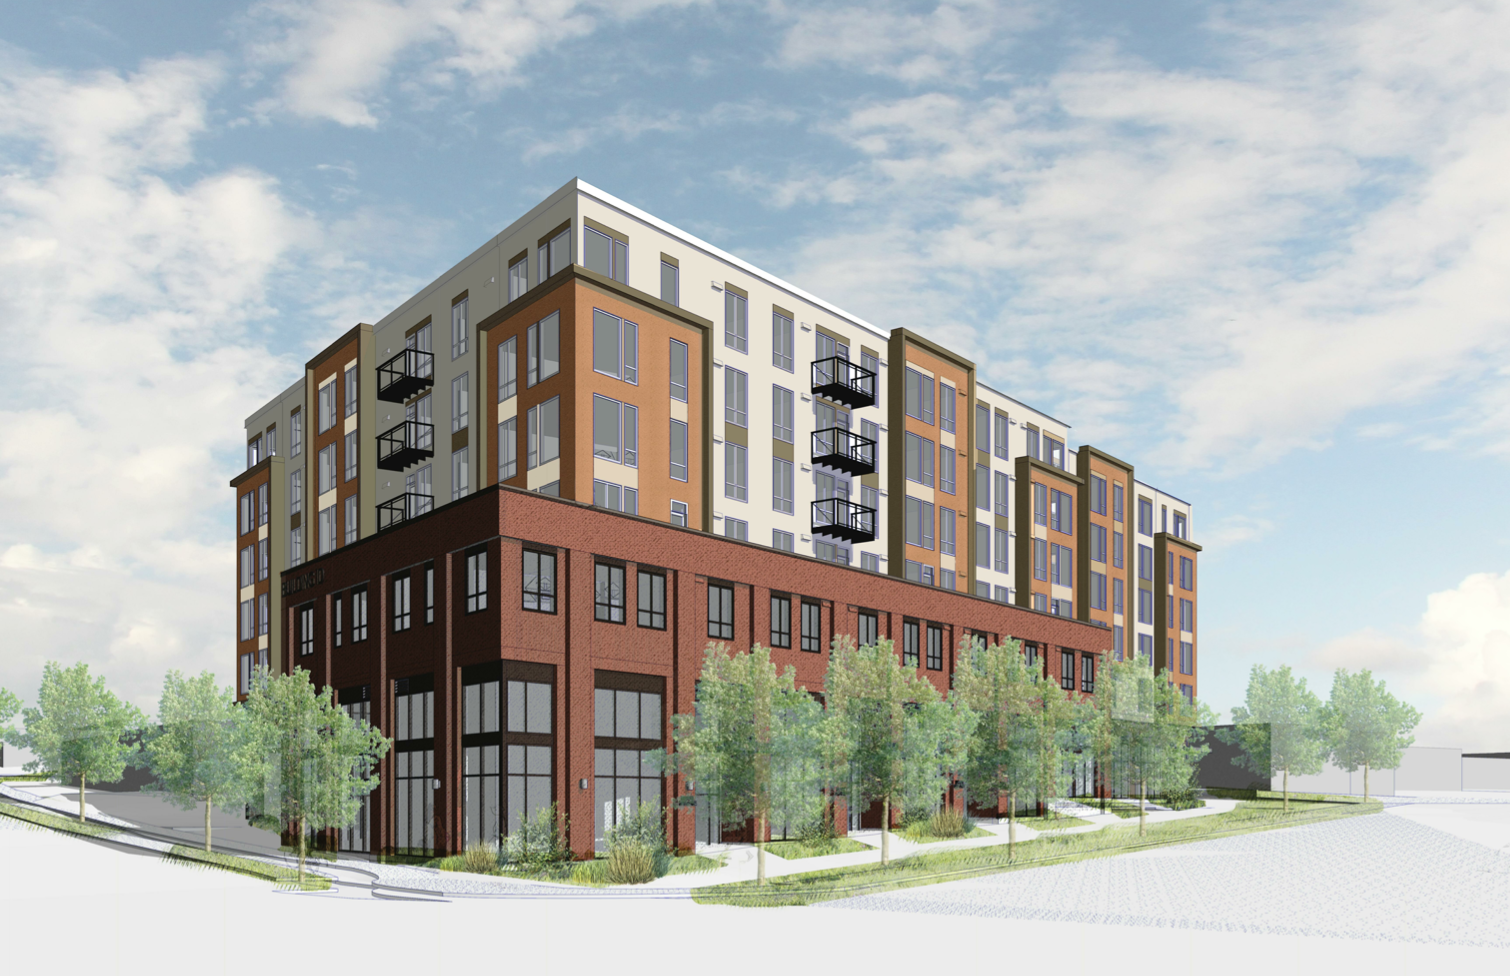 7-Story Apartment Project Receives Design Review Approval Near Future Light Rail in Bellevue